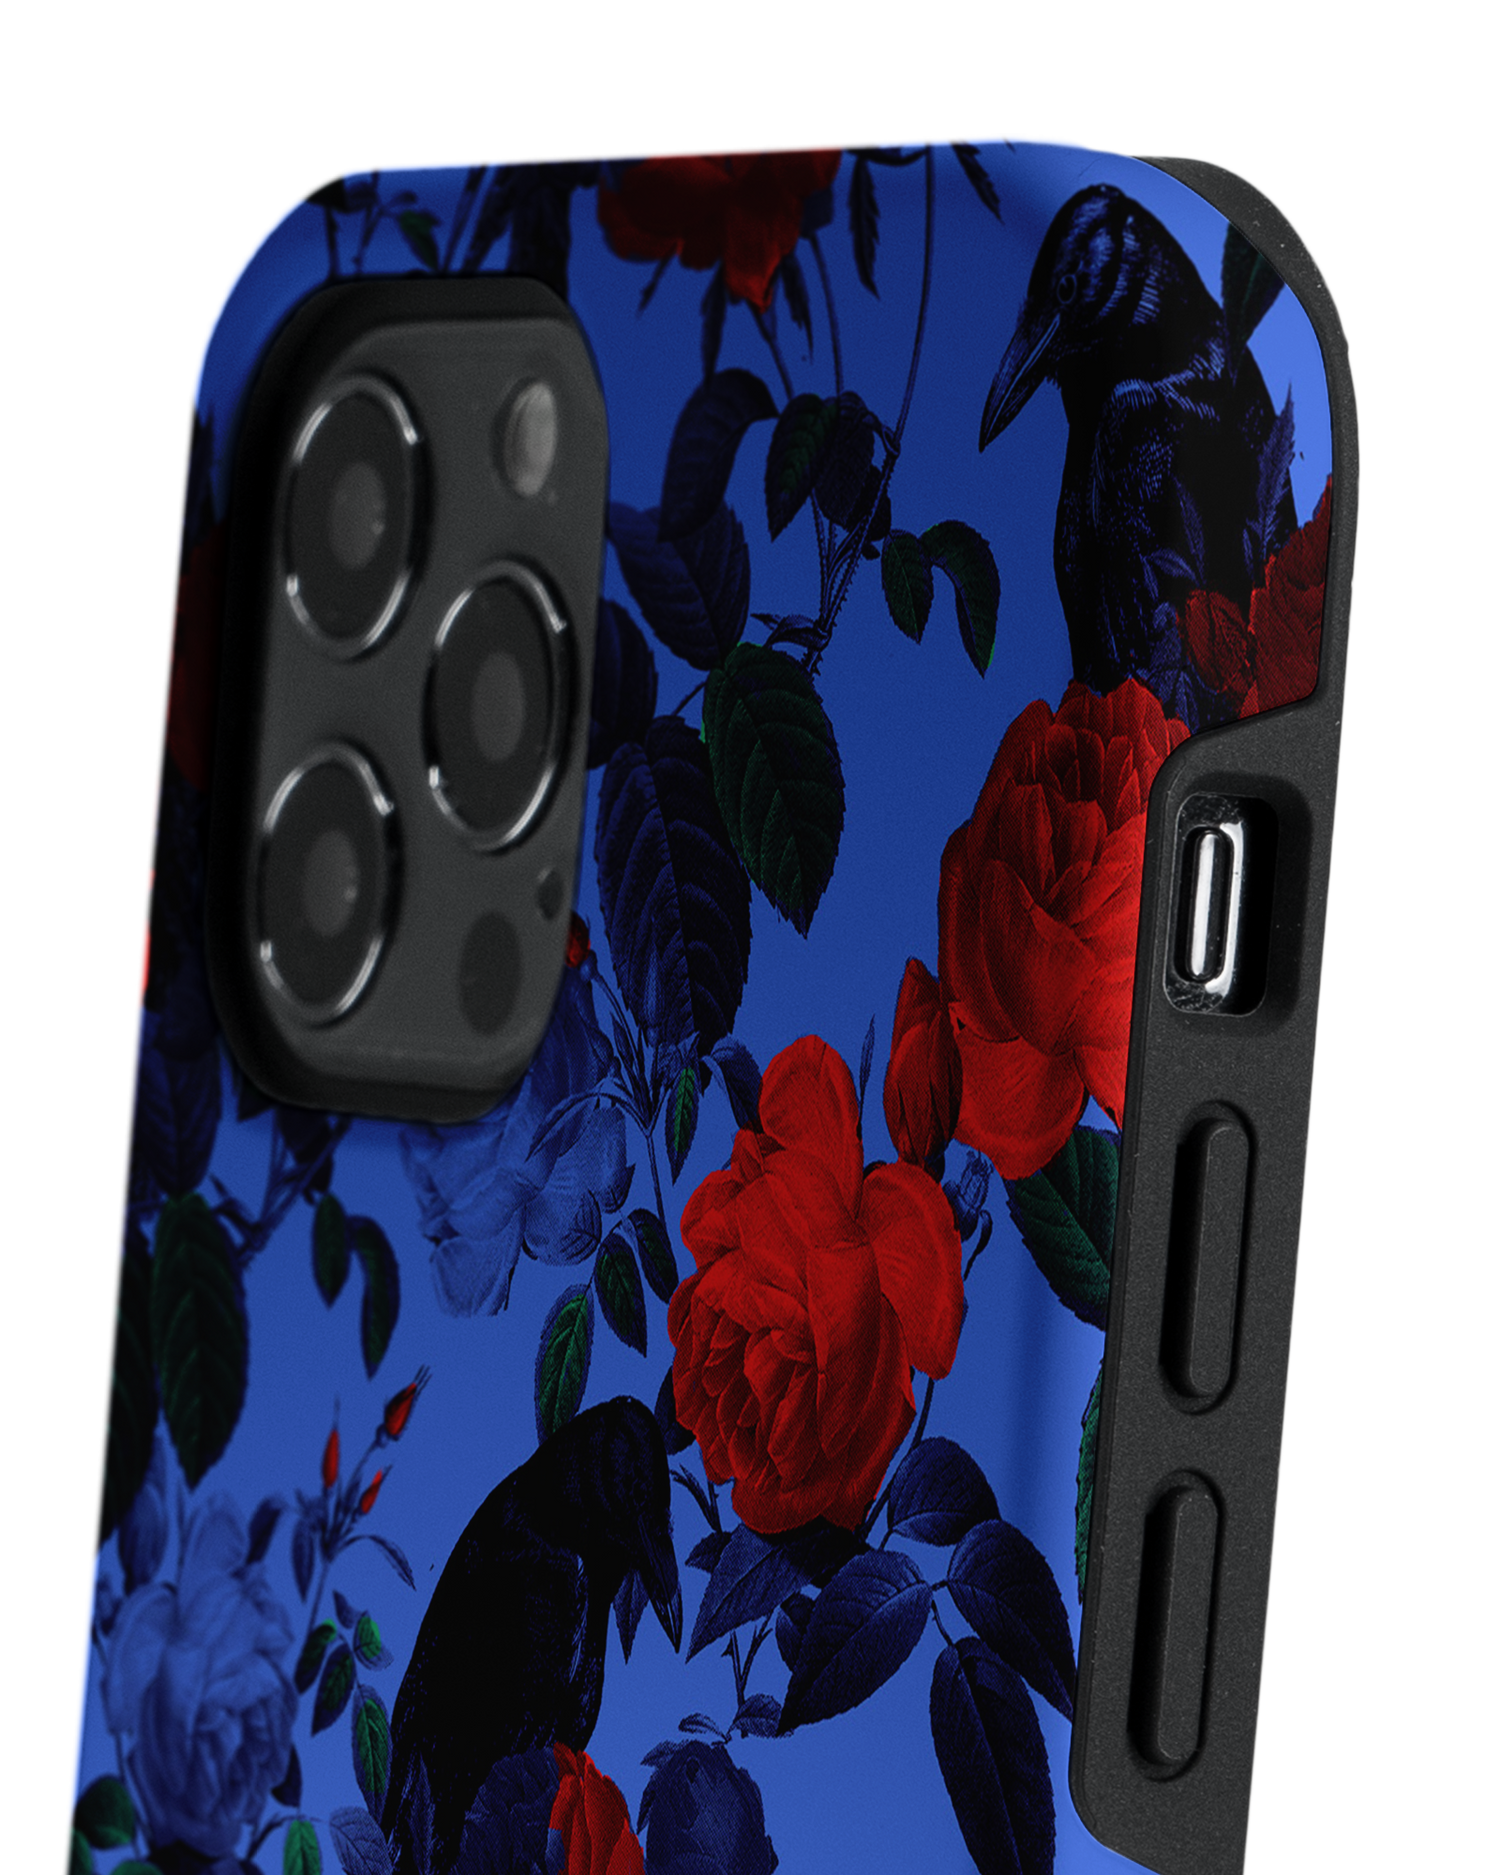 Roses And Ravens Premium Handyhülle Apple iPhone 12, Apple iPhone 12 Pro